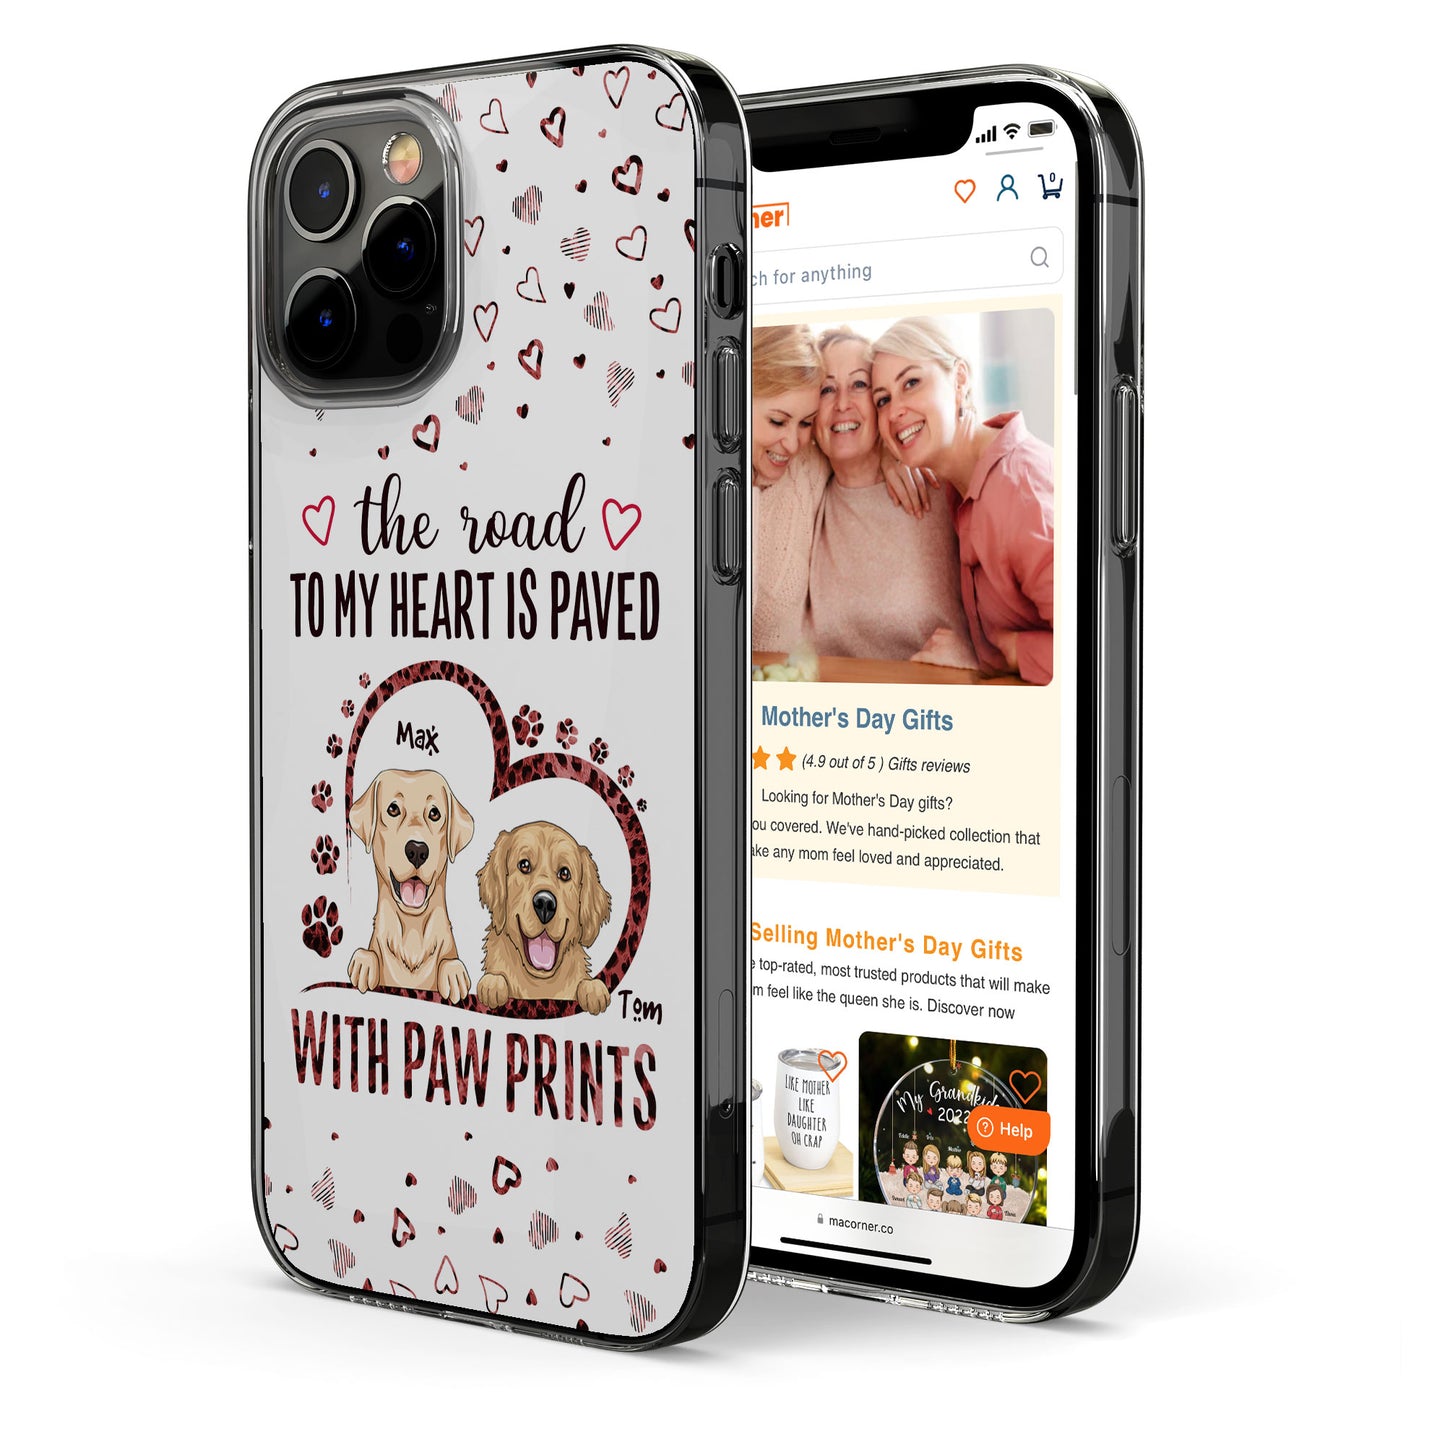 The Road To My Heart Is Paved With Paw Prints - Personalized Clear Phone Case